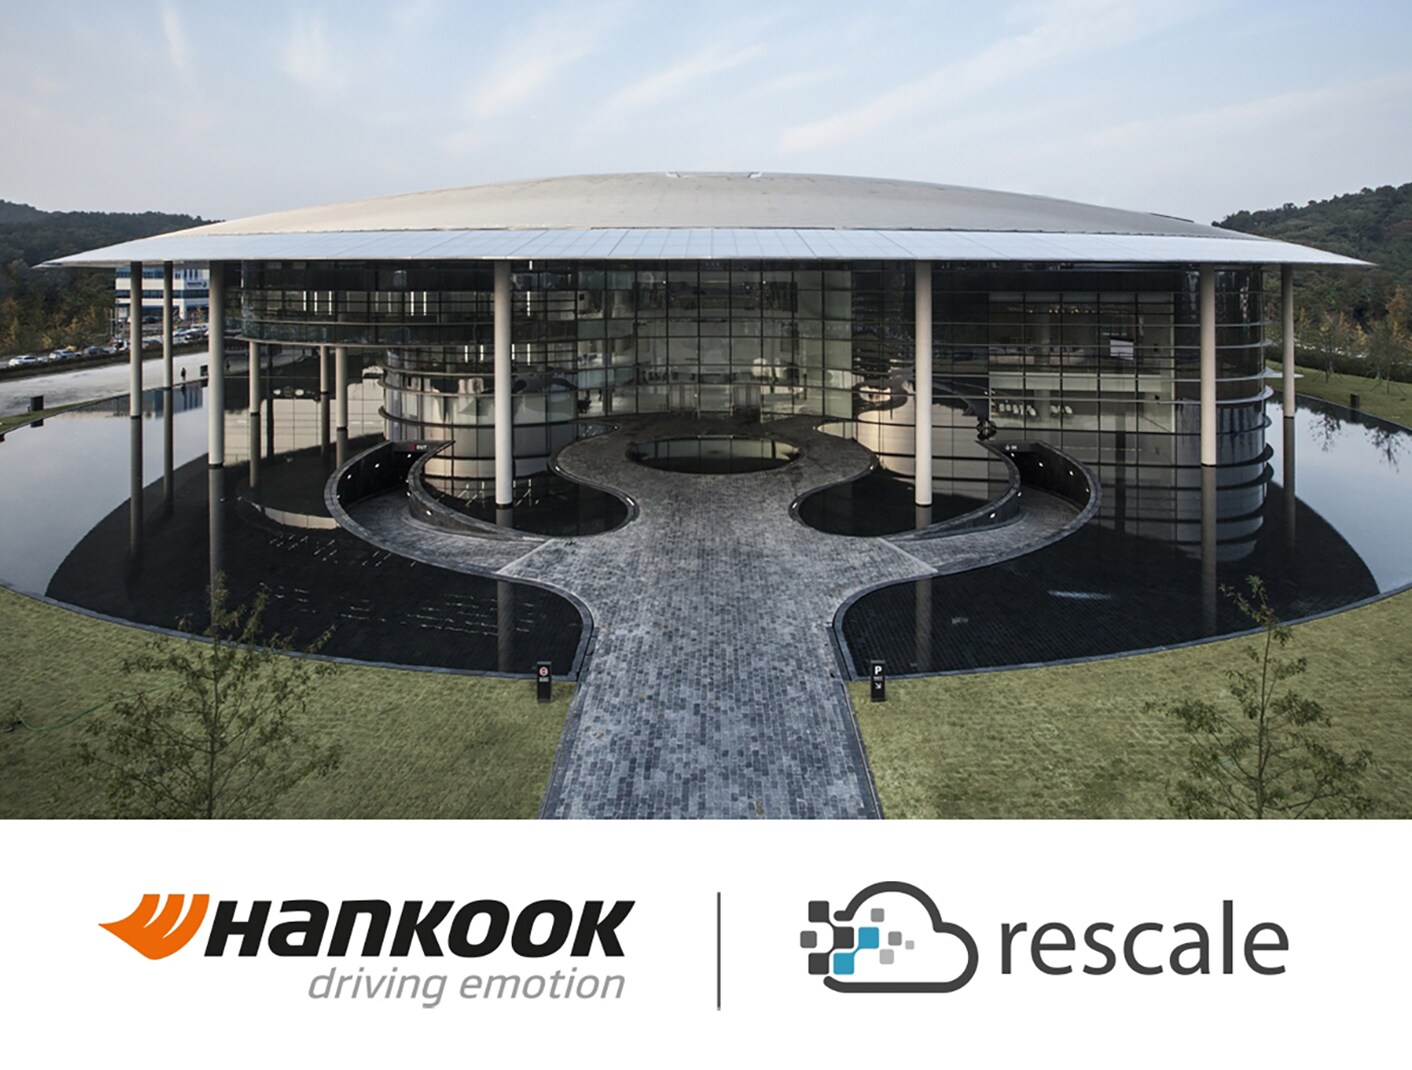 Hankook Tire partners with Rescale, a HPC cloud platform, to accelerate digital transformation